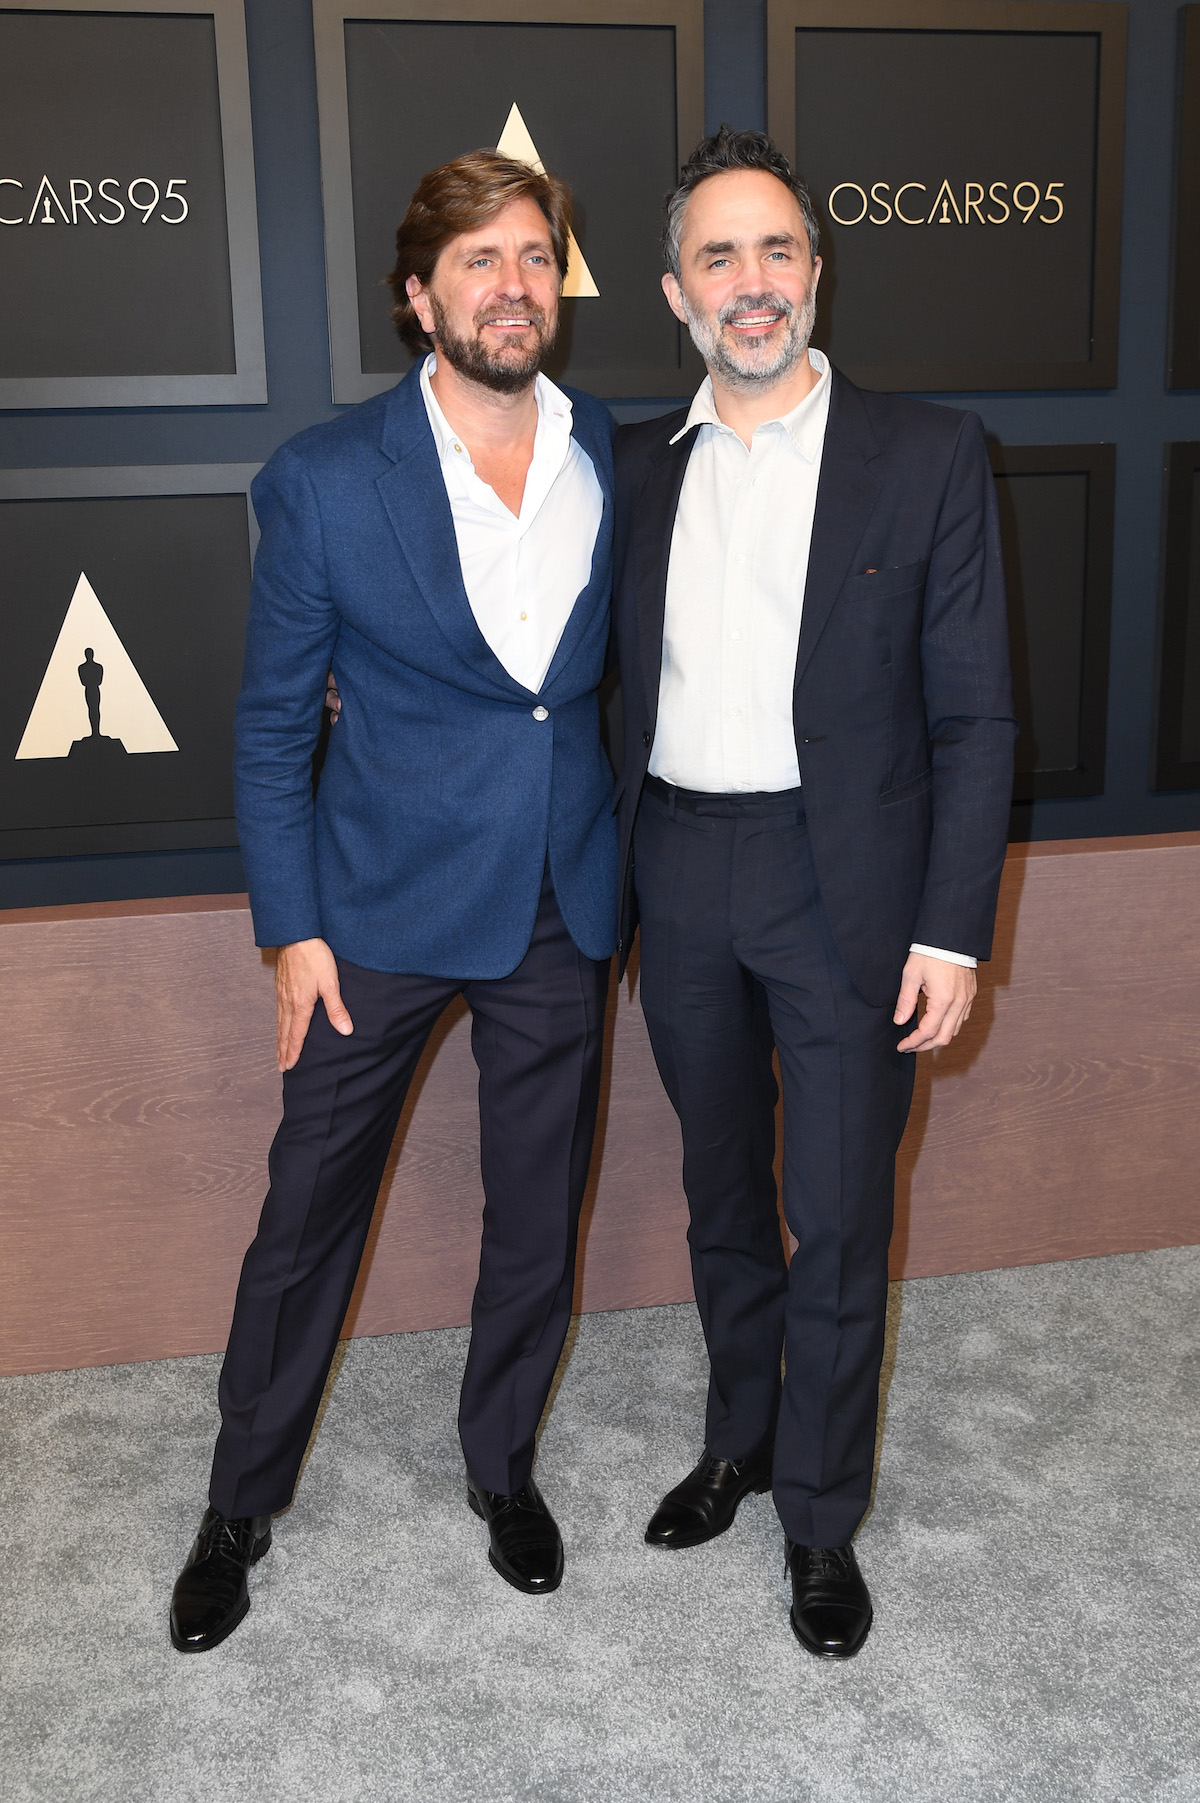 BEVERLY HILLS, CALIFORNIA - FEBRUARY 13: (L-R) Ruben Östlund and Erik Hemmendorff attend the 95th Annual Oscars Nominees Luncheon at The Beverly Hilton on February 13, 2023 in Beverly Hills, California. (Photo by JC Olivera/Getty Images)